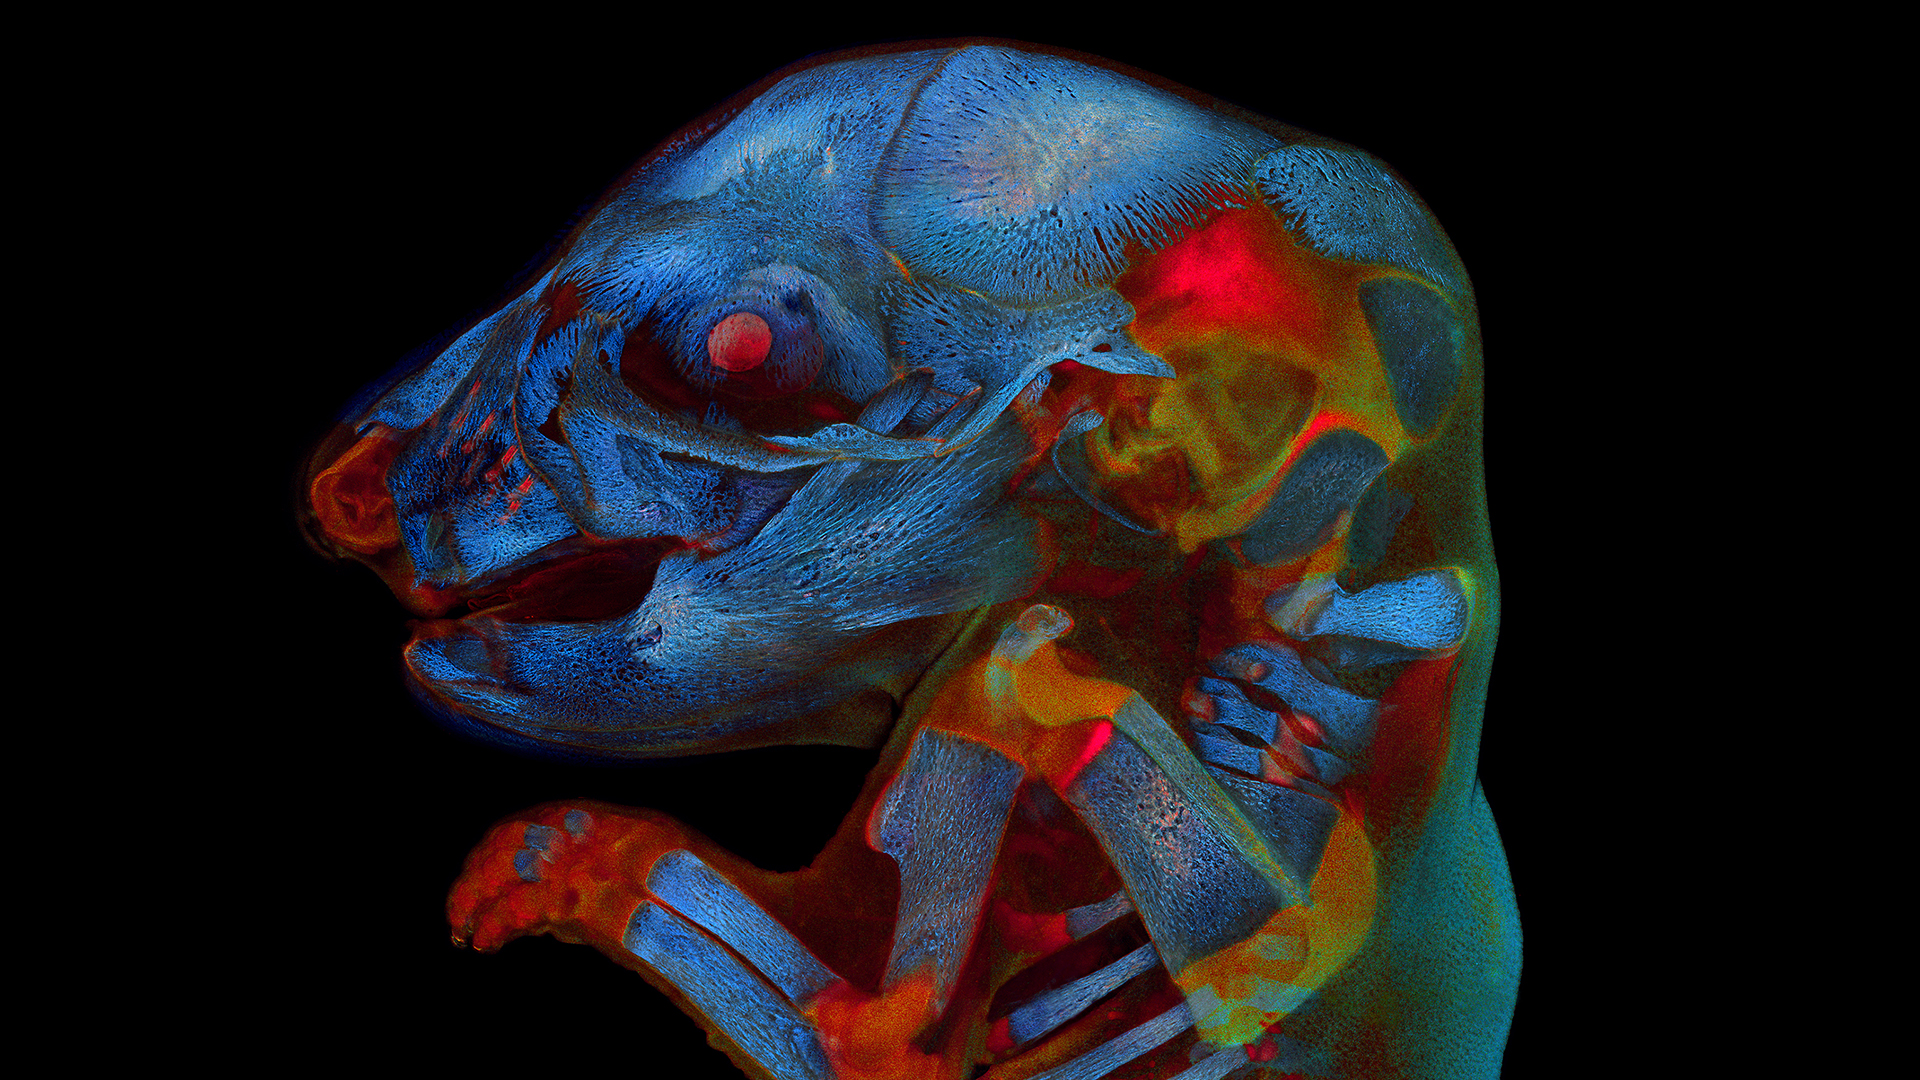 Superb, red-eyed rat fetus is global list contest’s gorgeously creepy winner